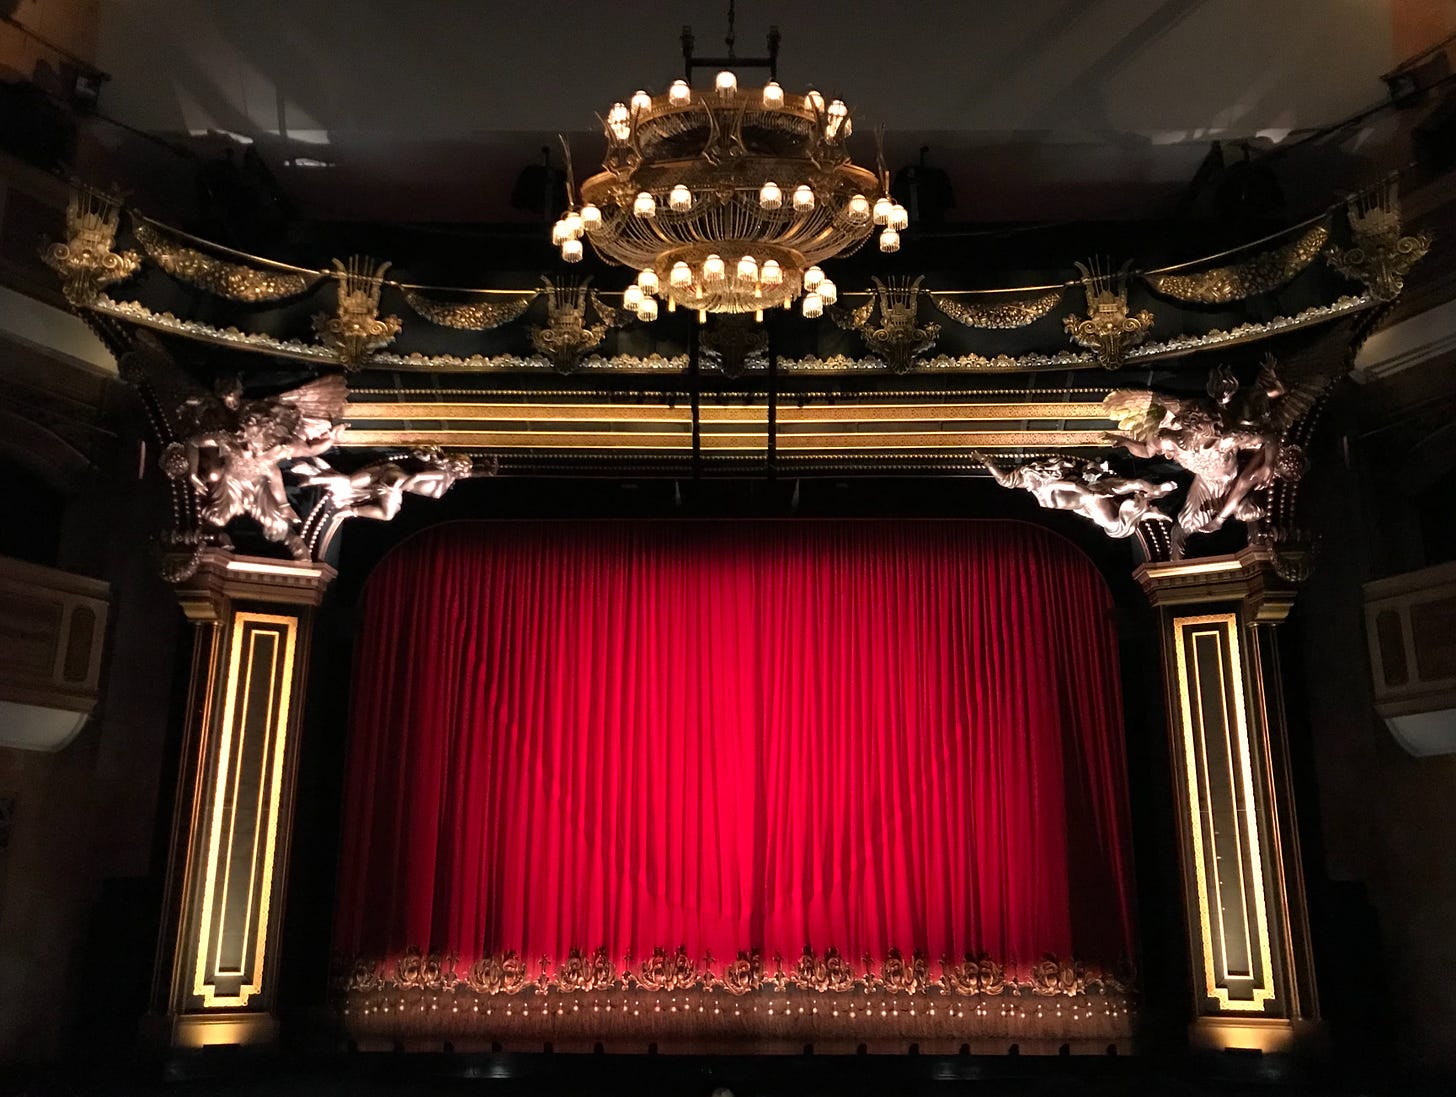 A theater. Photo by Gwen King on Unsplash.